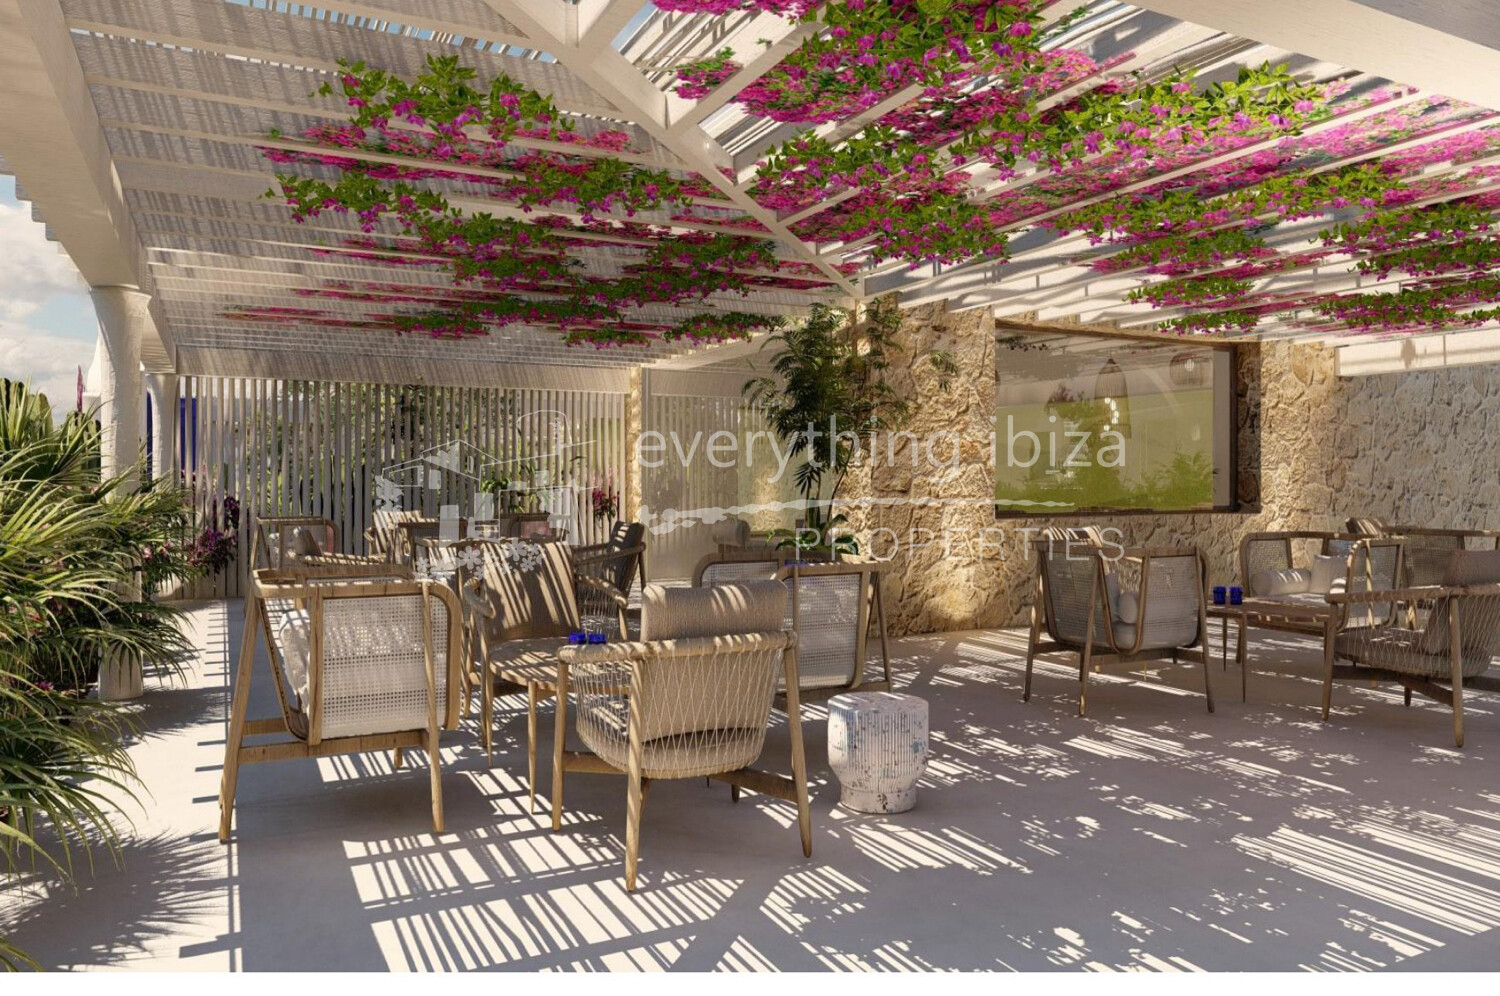 Licensed Mediterranean Style Restaurant with Super Views from Hillside Position, ref. 1600, for sale in Ibiza by everything ibiza Properties